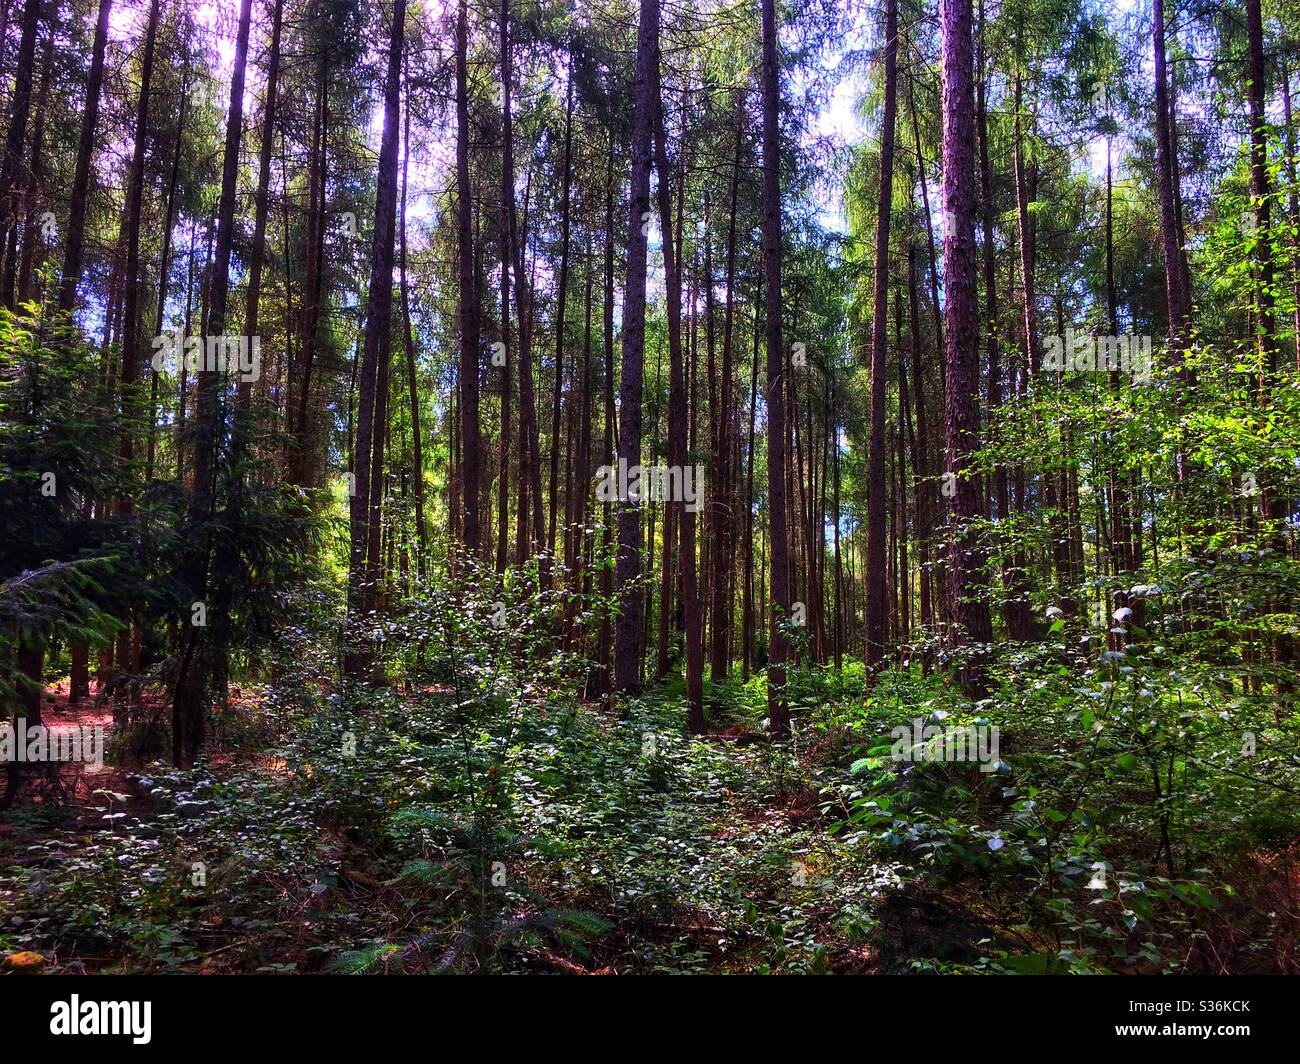 Dense woodland in the English countryside Stock Photo